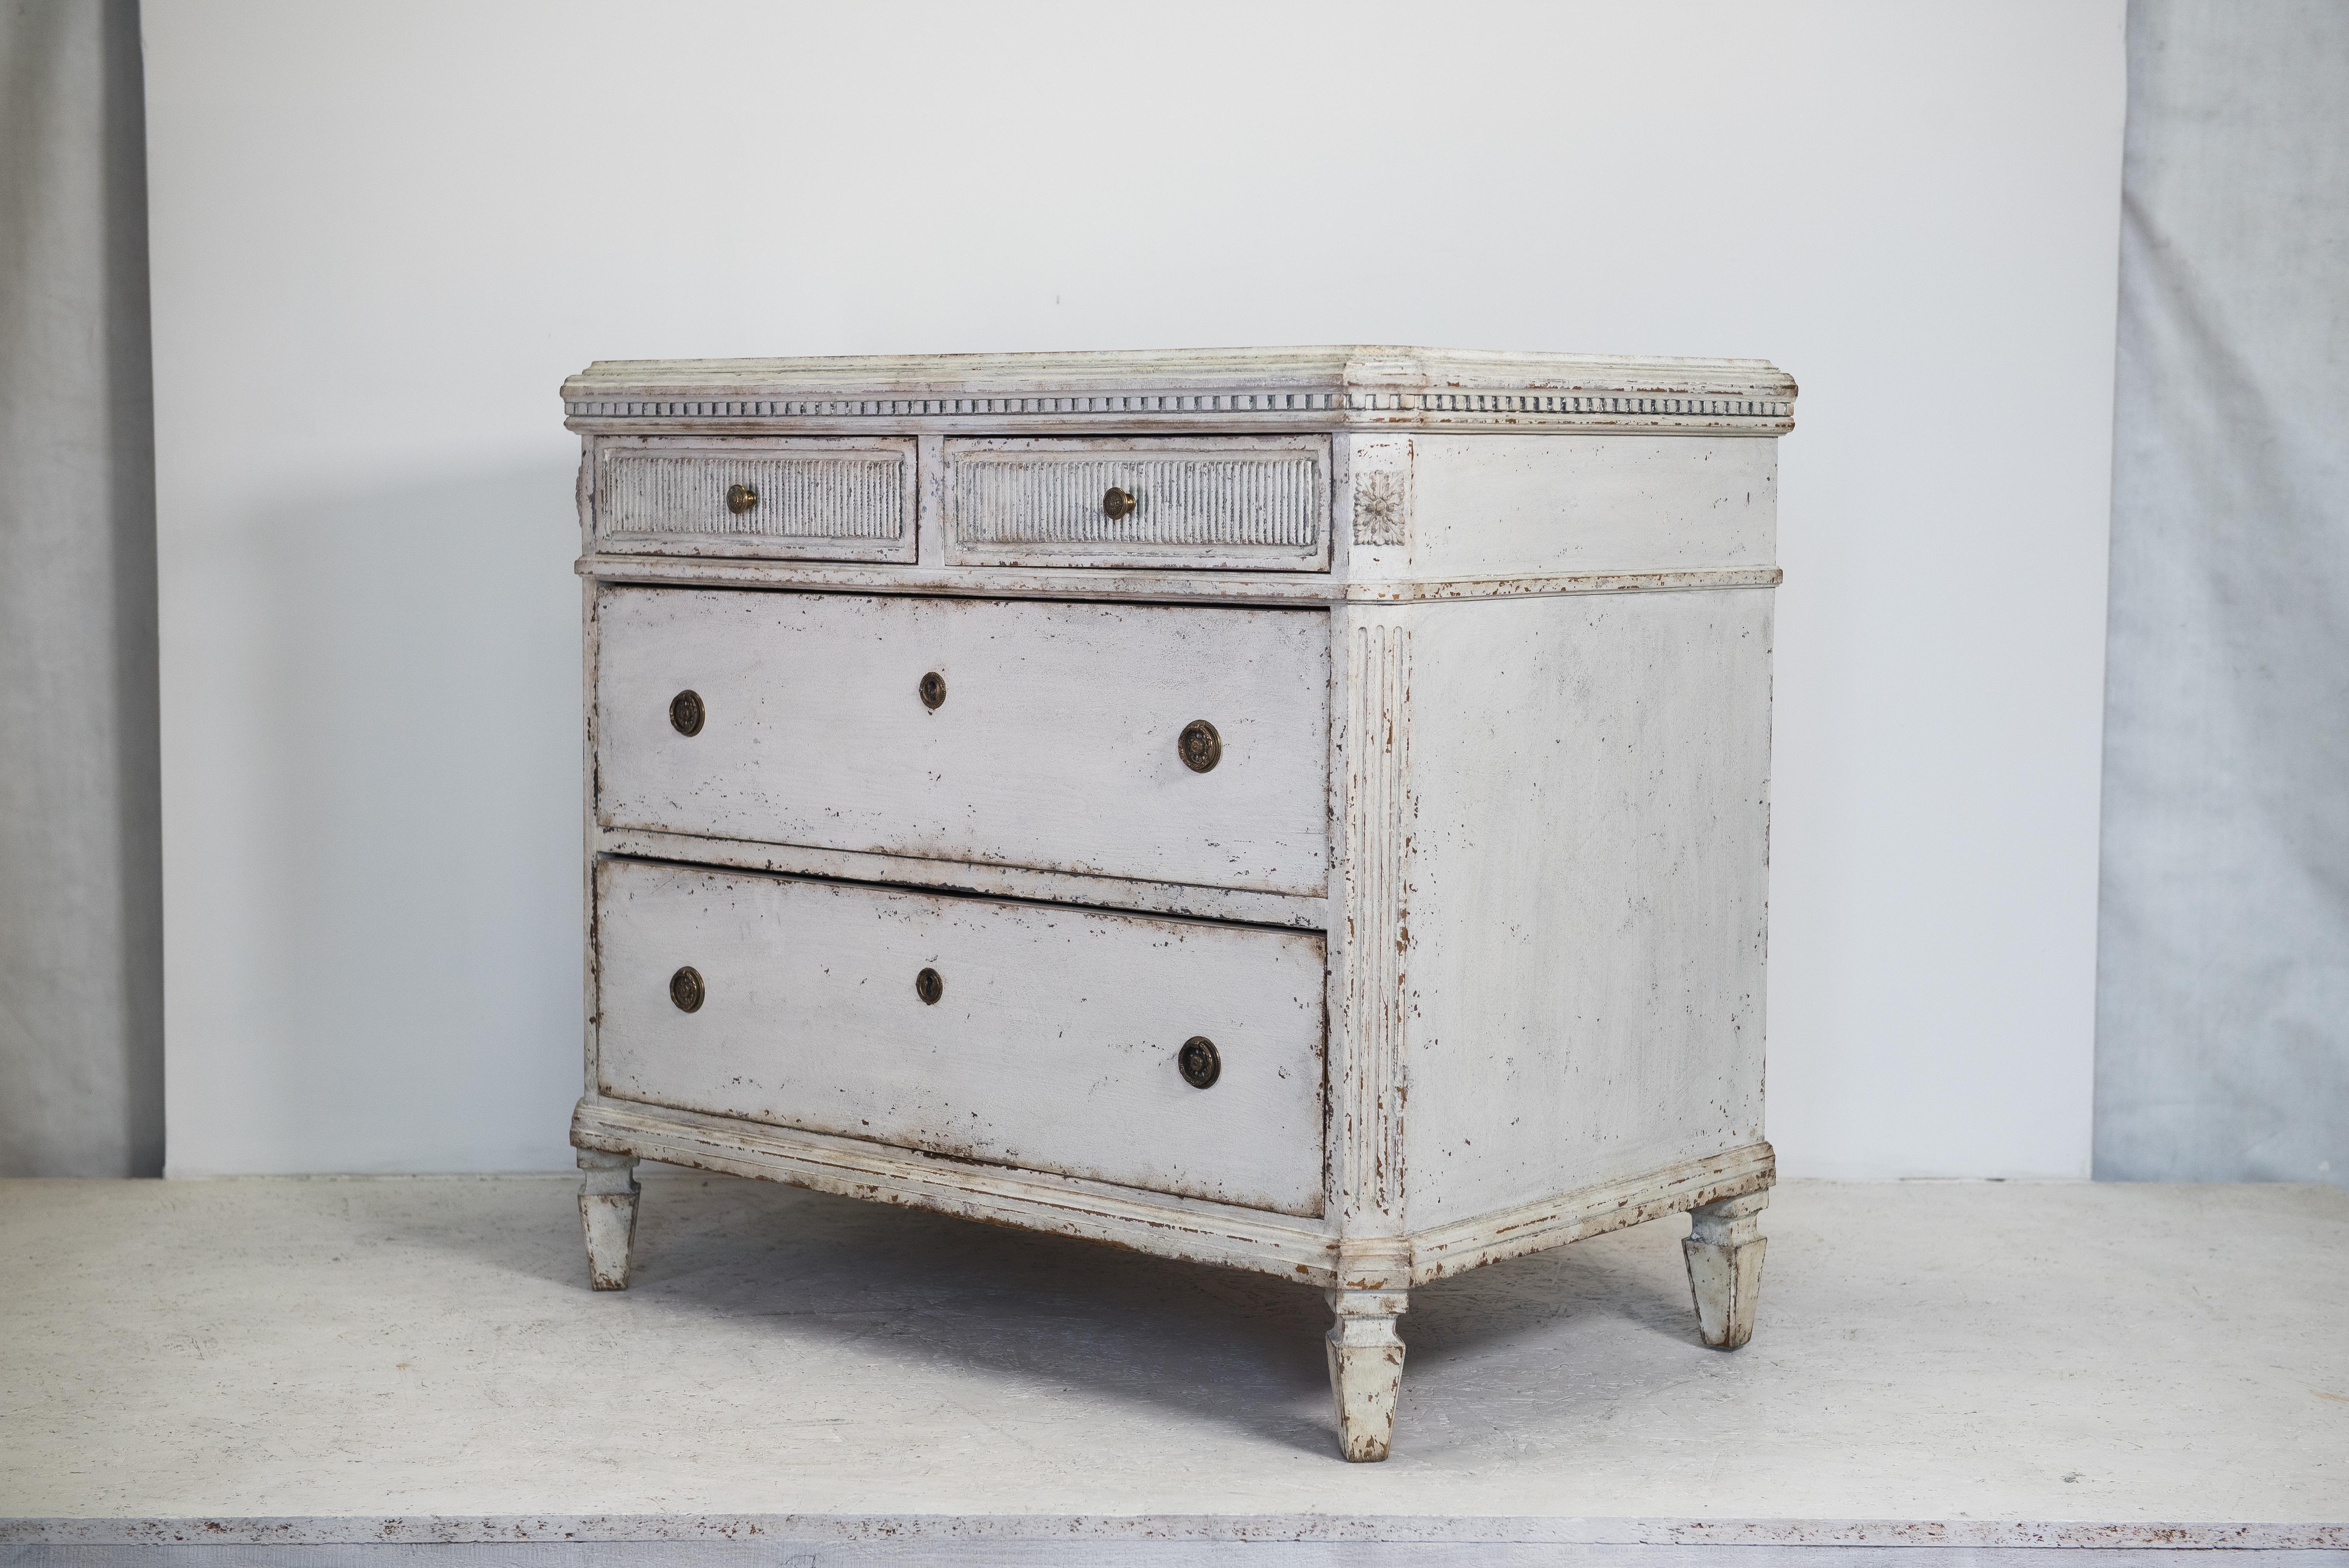 Please note - this item will be available to ship form early march 2022

C 1850 antique Swedish Gustavian painted chest of 4 drawers commode with detailed decorative motifs on the top rail, front and brass detailing.

It has 4 drawers with brass